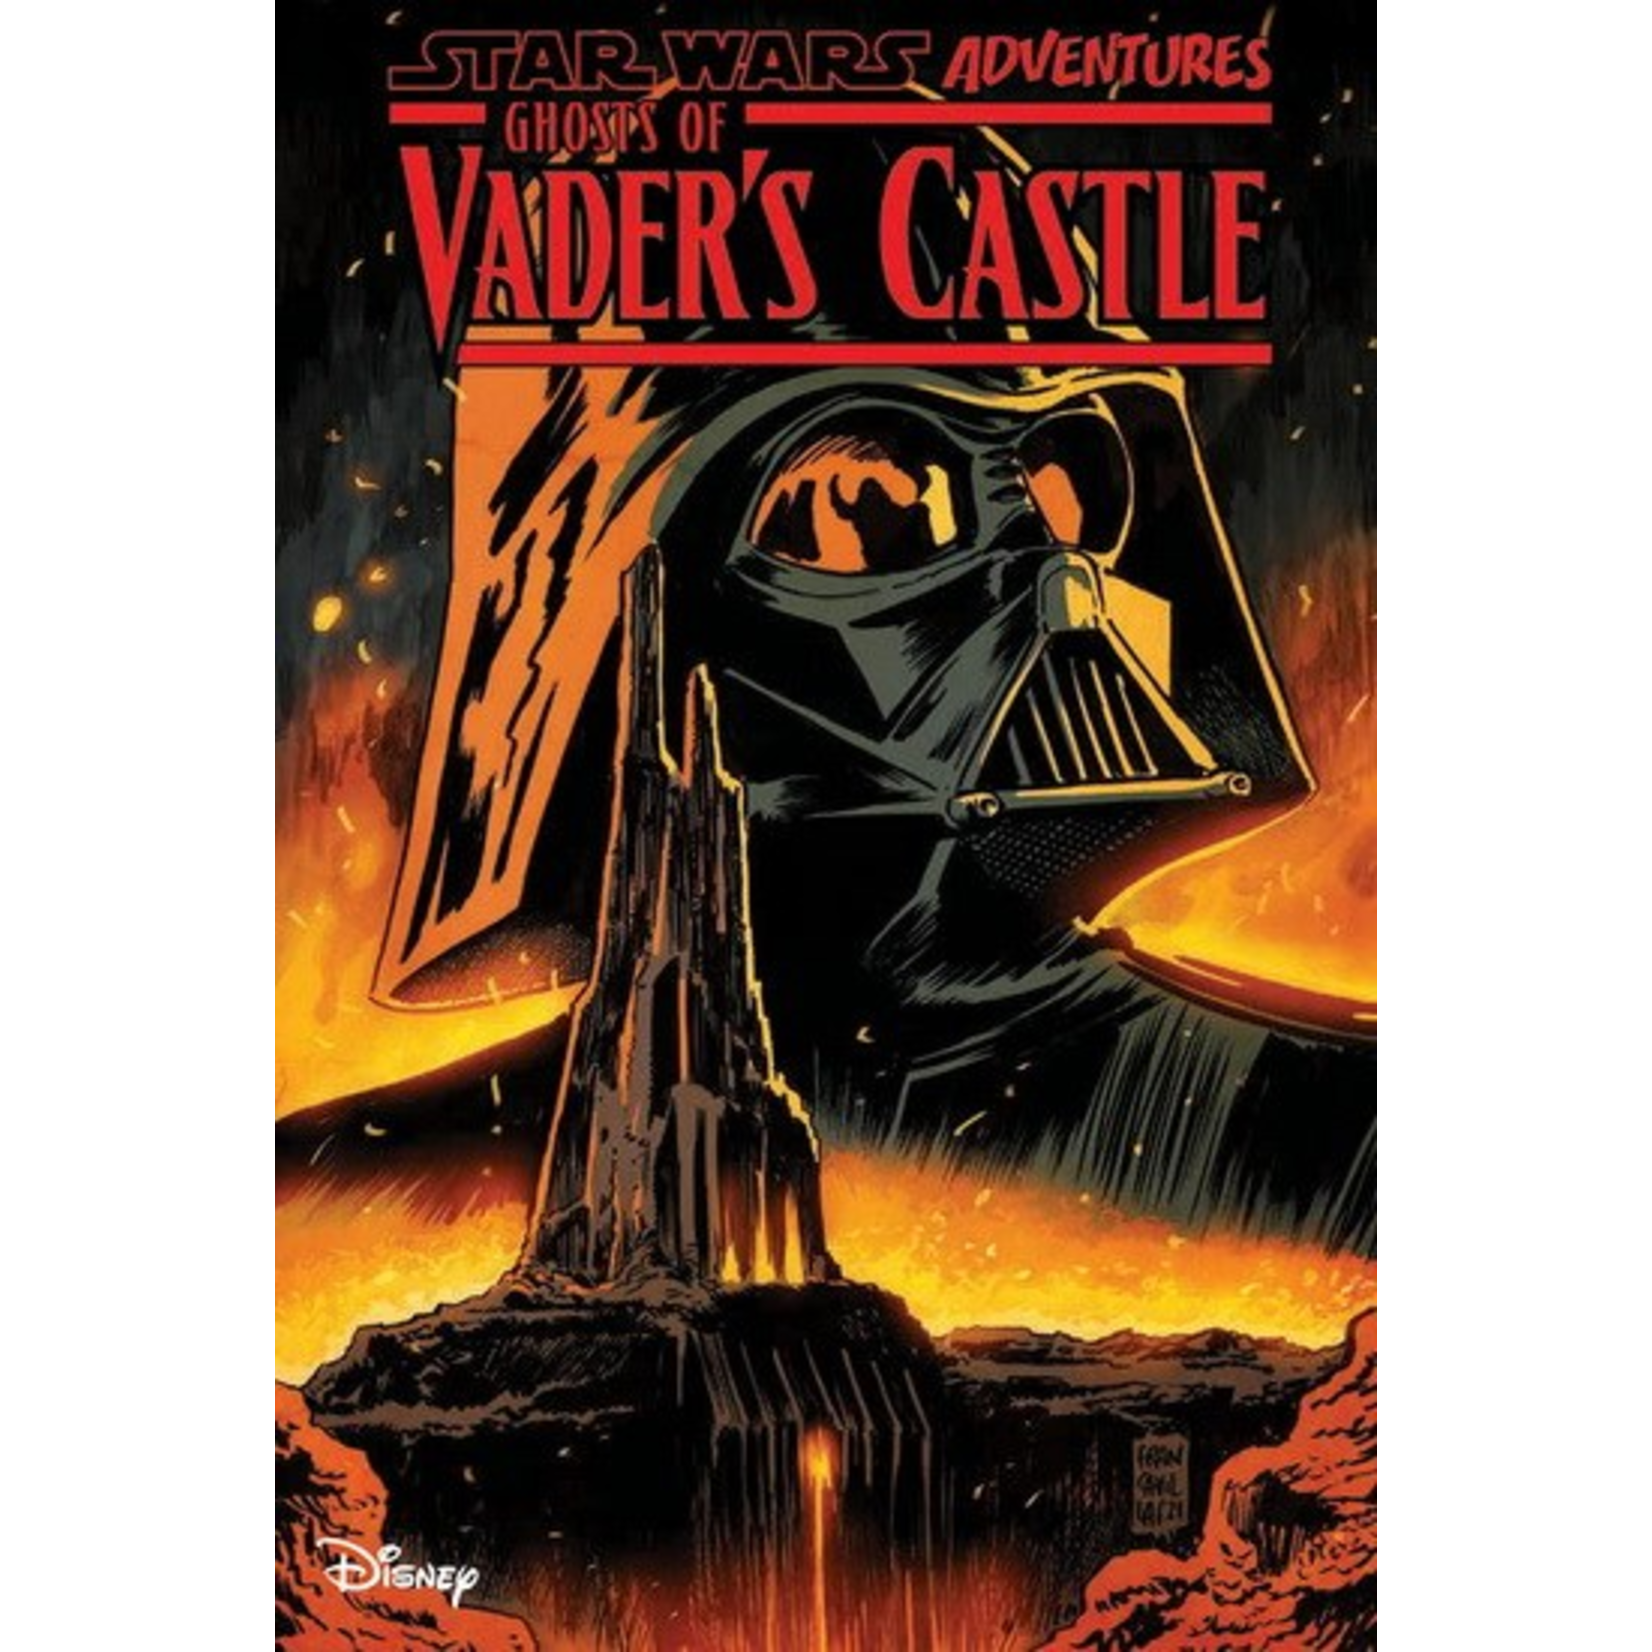 IDW PUBLISHING STAR WARS ADV GHOSTS OF VADERS CASTLE TP